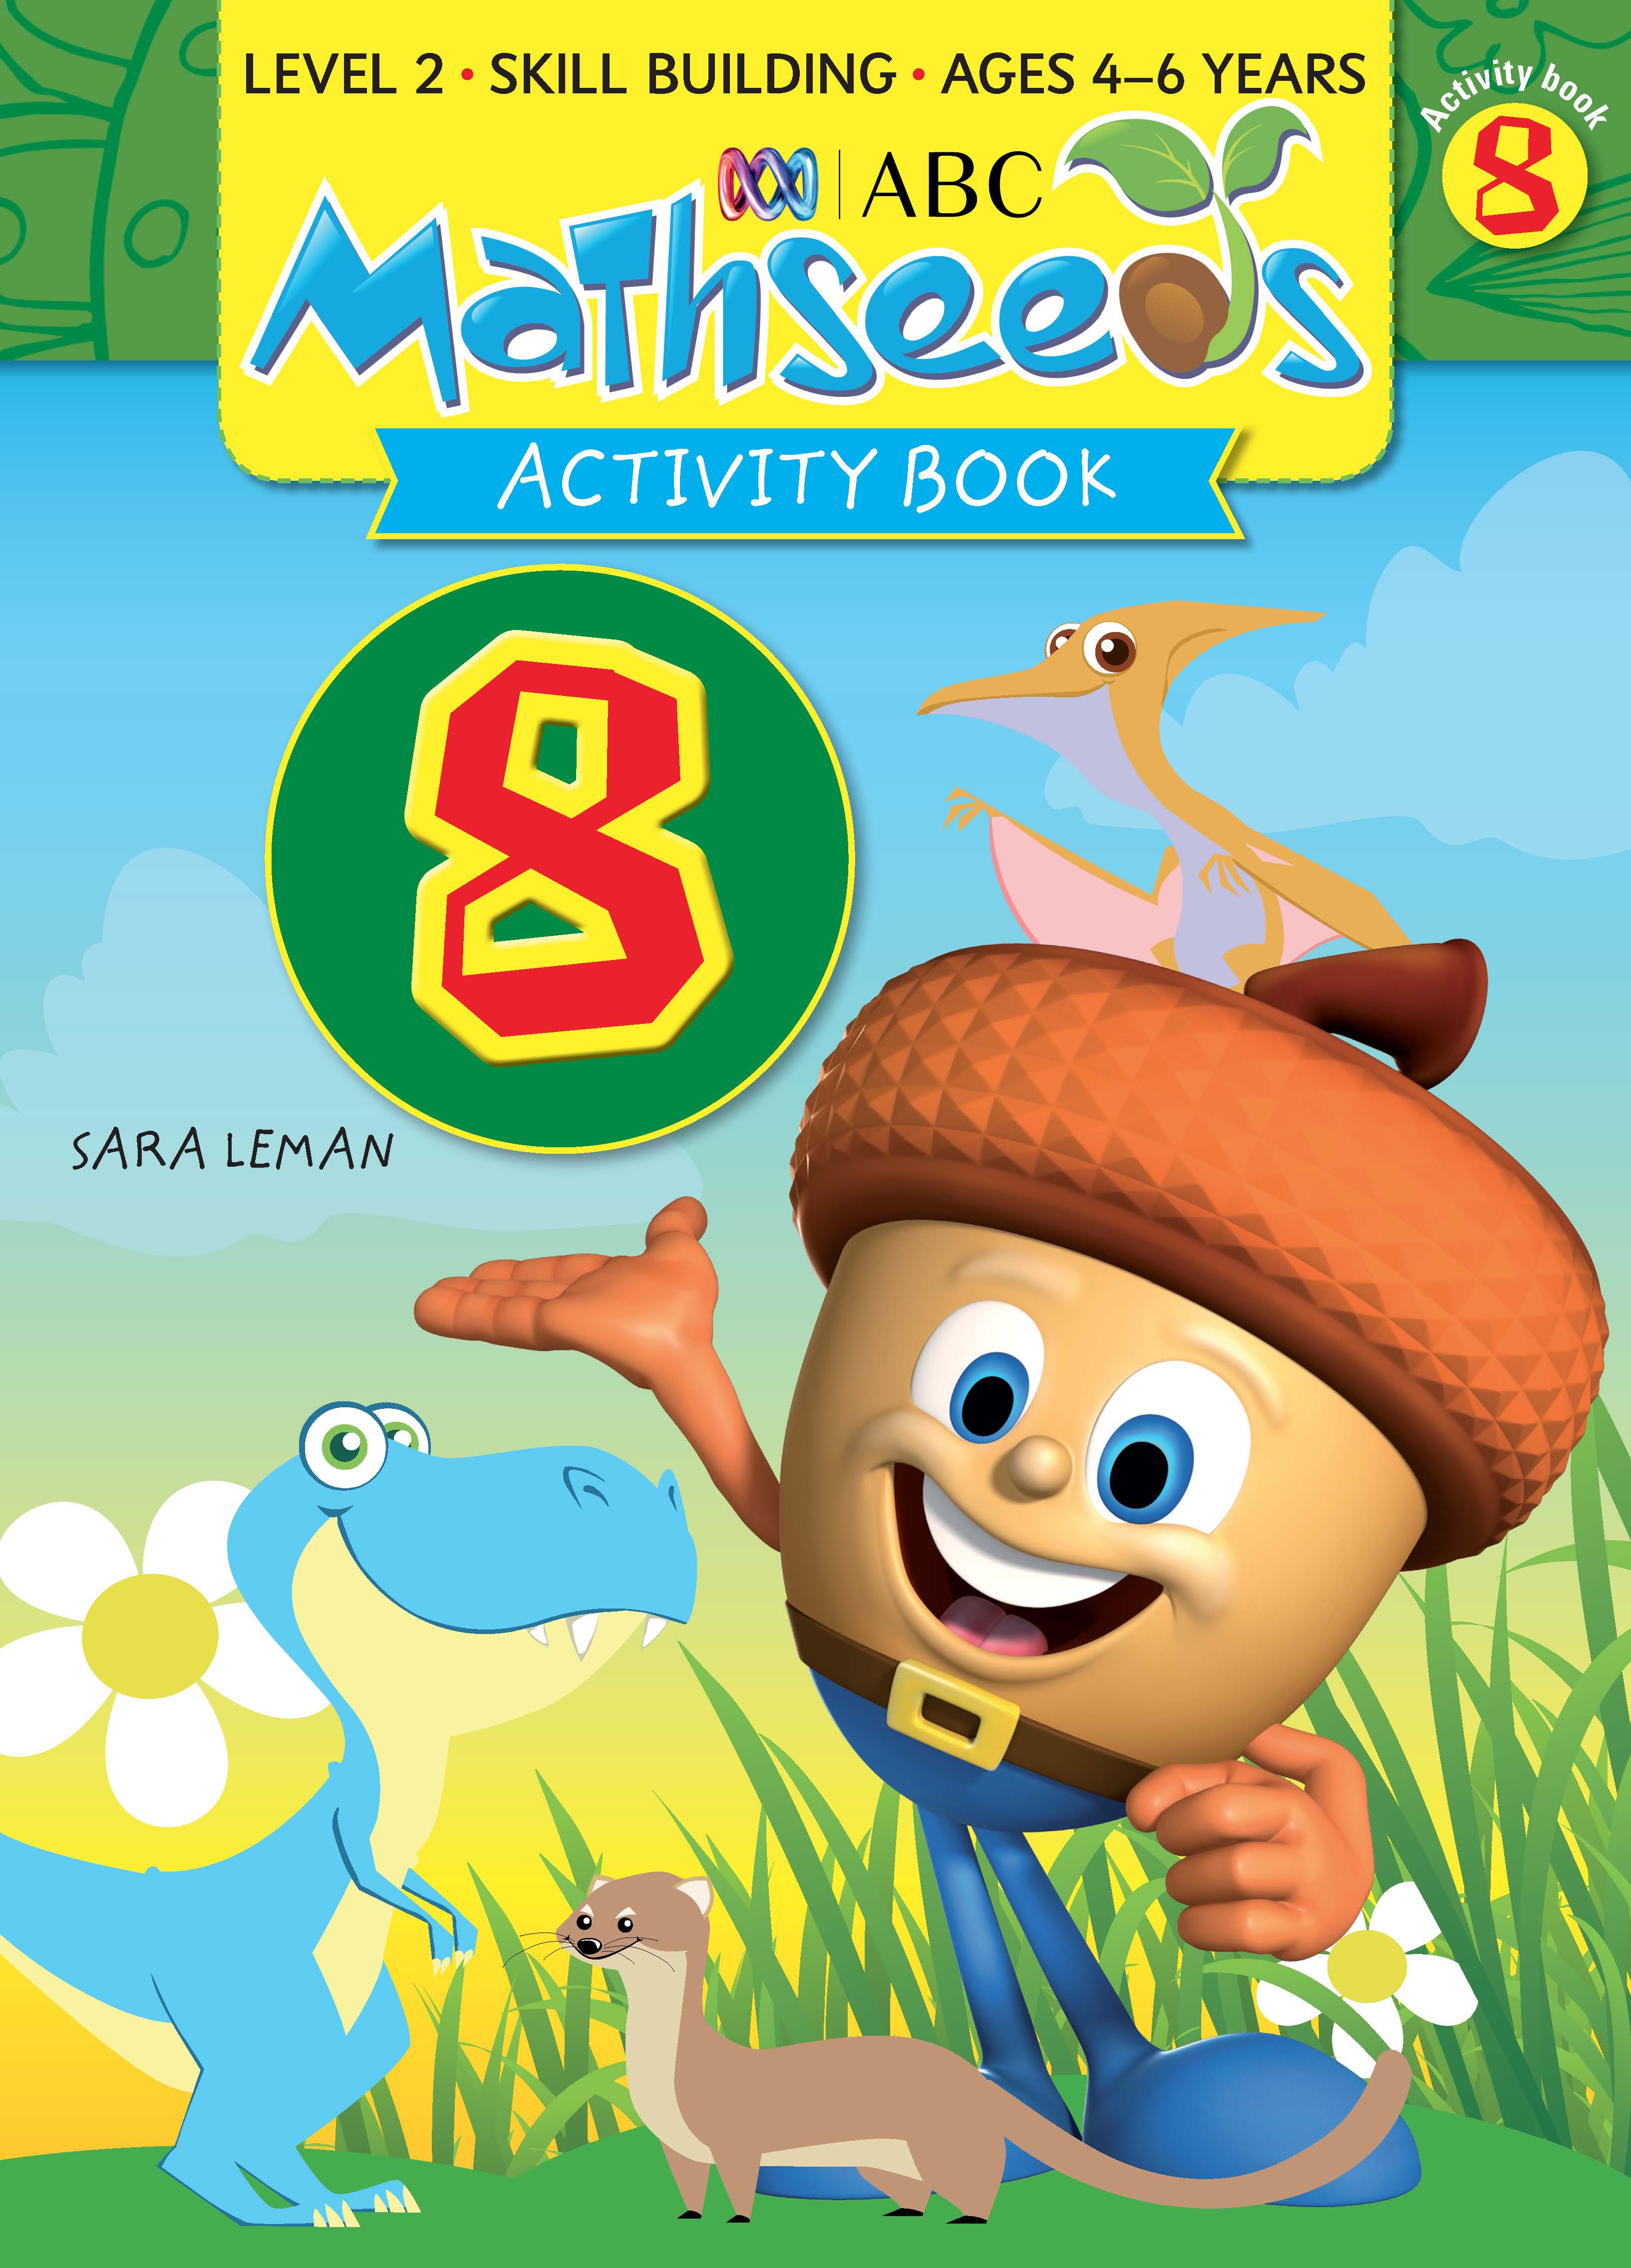 Picture of ABC Mathseeds Activity Book 8 Level 2 Ages 4-6